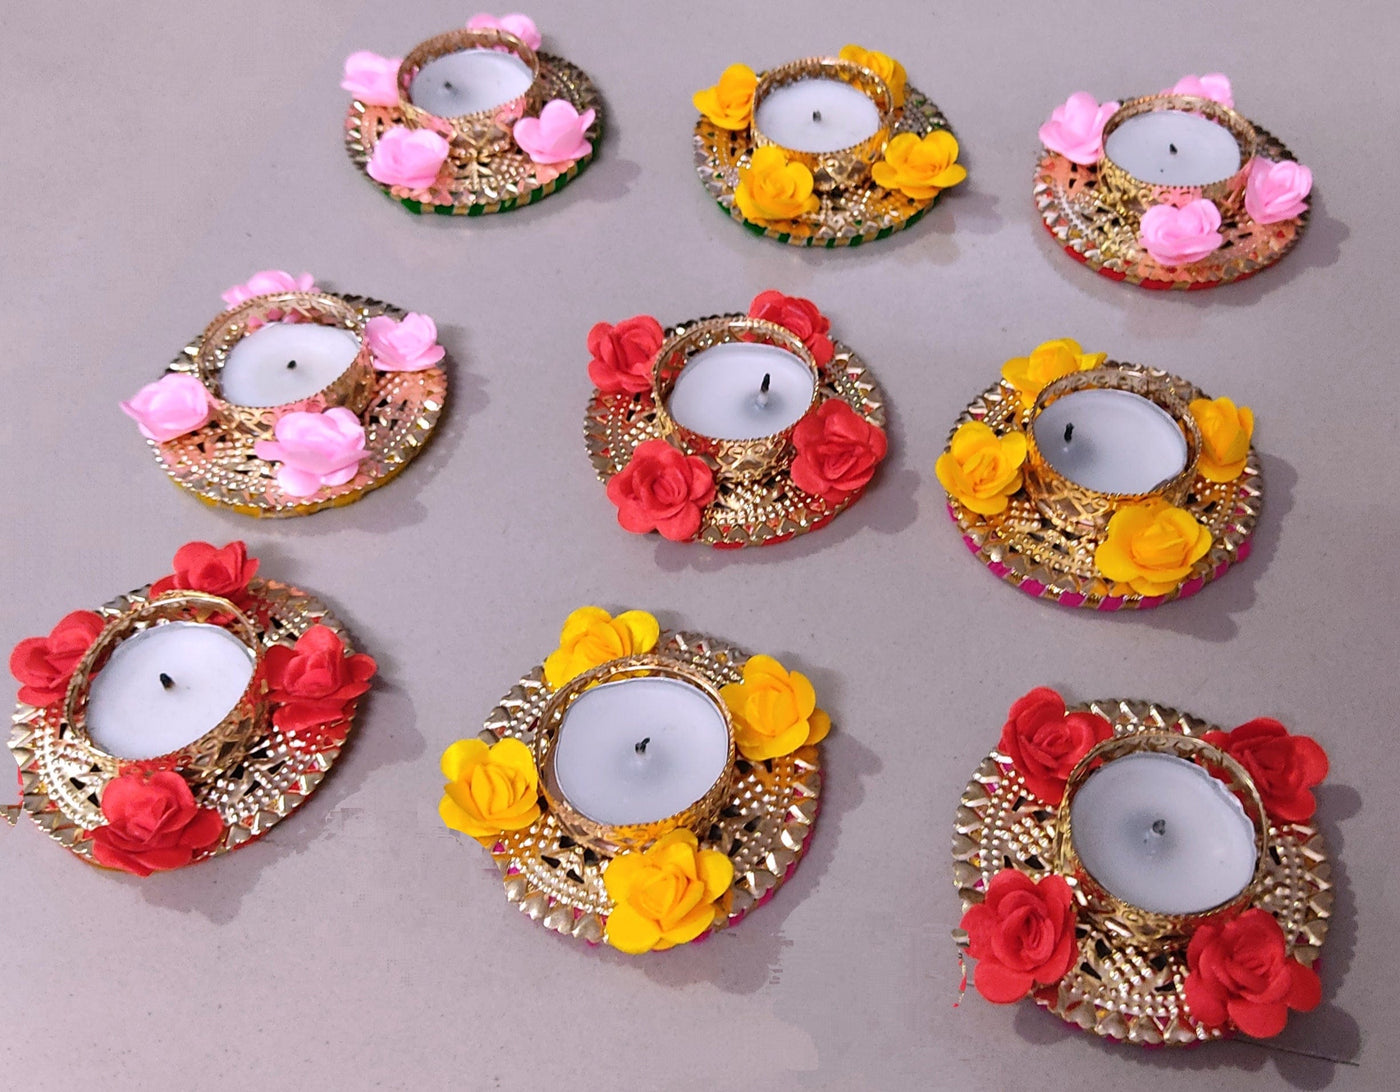 LAMANSH Candle Holders LAMANSH® 3 inch Round Floral 🌺 Tealight Candle holder stand for Diwali and Home Decoration / Candle holders for Festival ✨ giveaways (candles are included)